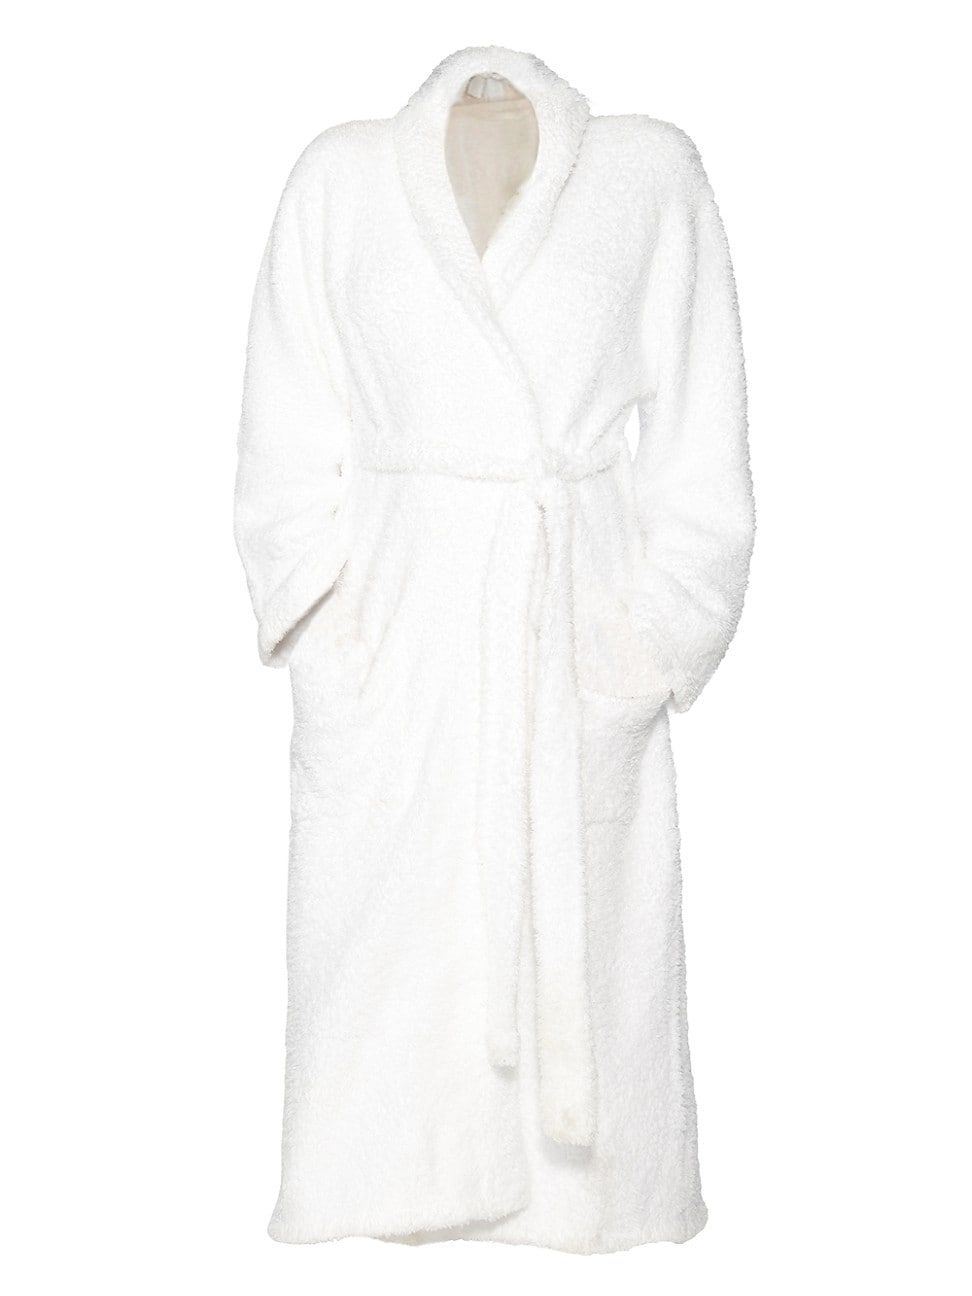 Barefoot Dreams The CozyChic Adult Robe - White - Size Medium | Saks Fifth Avenue